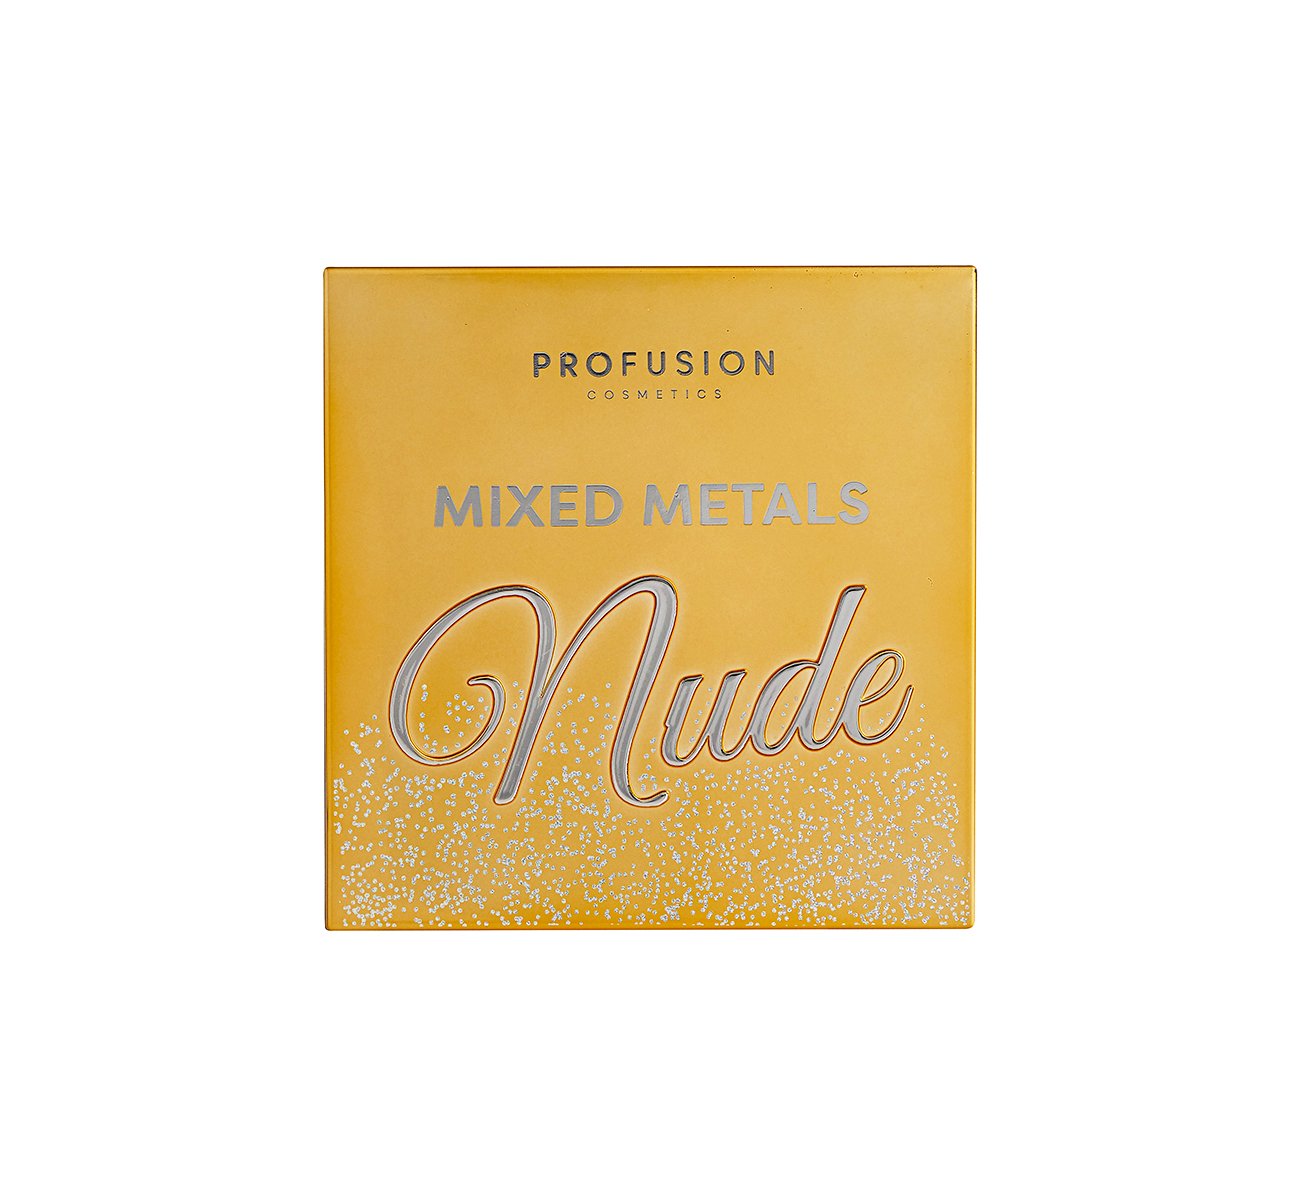 Profusion - Mixed Metals Nude Palette